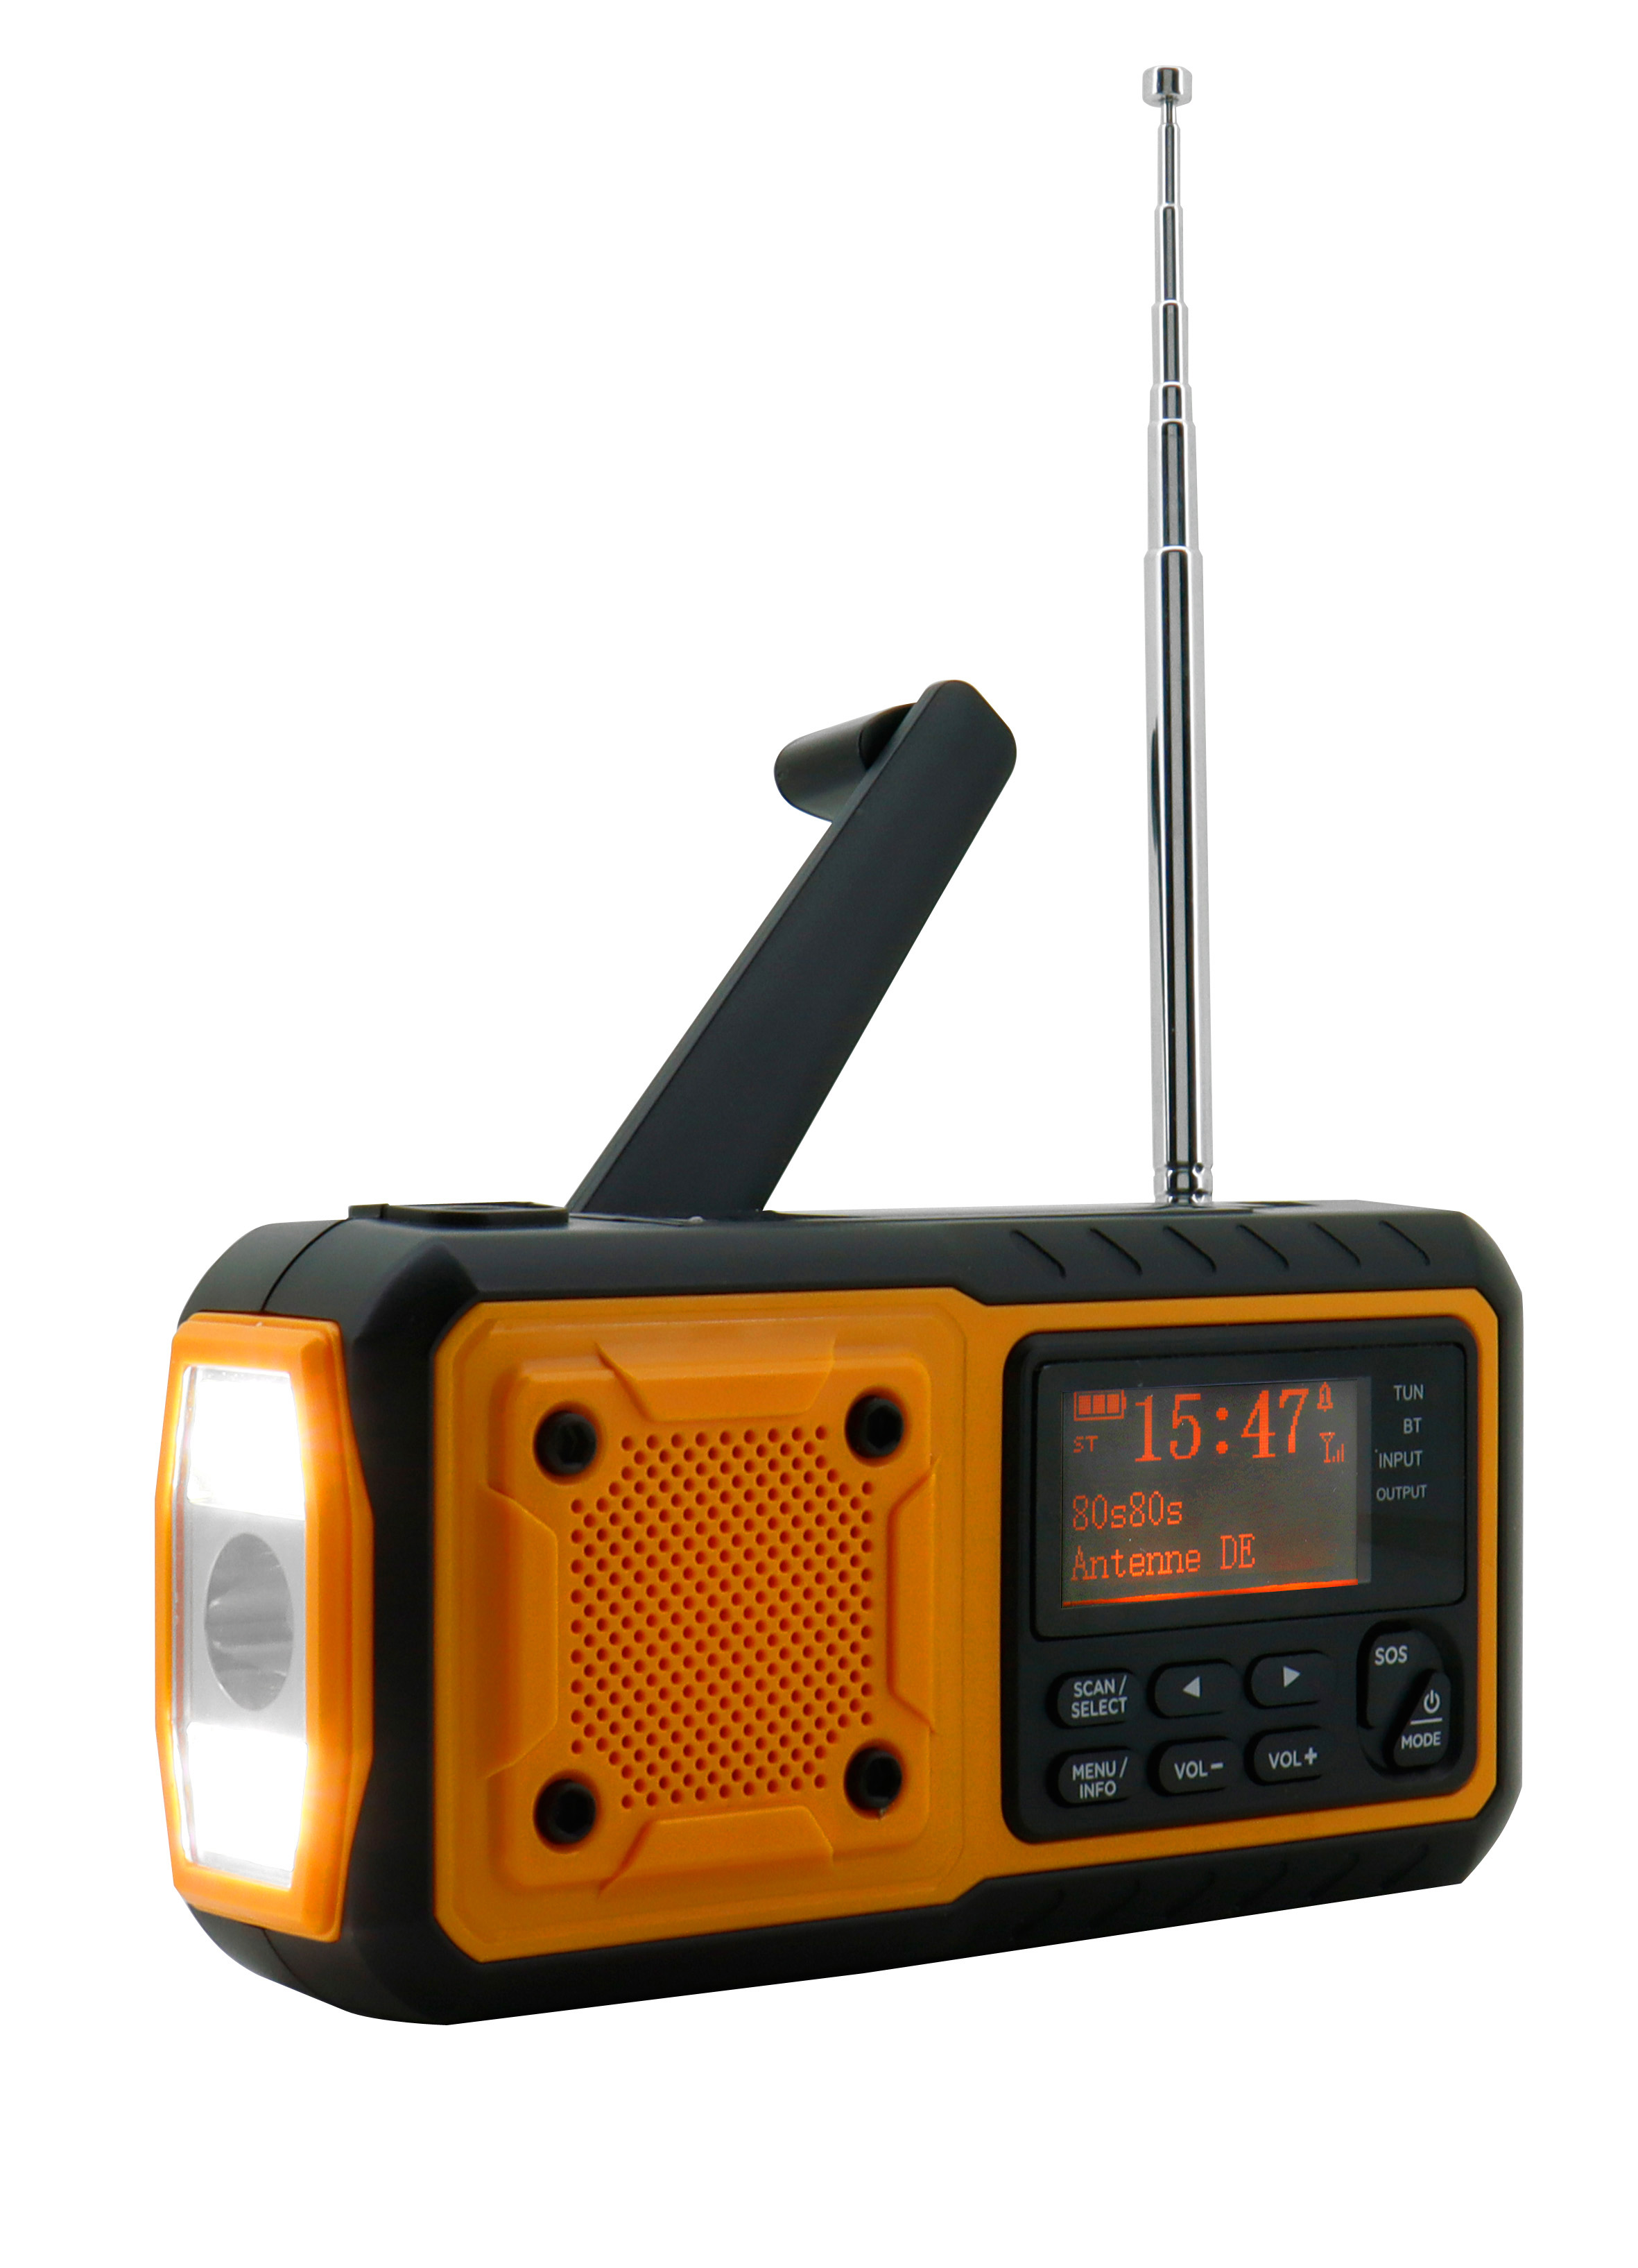 DAB+/UKW emergency Li-Ion radio lights panel/dynamo, Bluetooth® solar built-in and battery, LED with digital